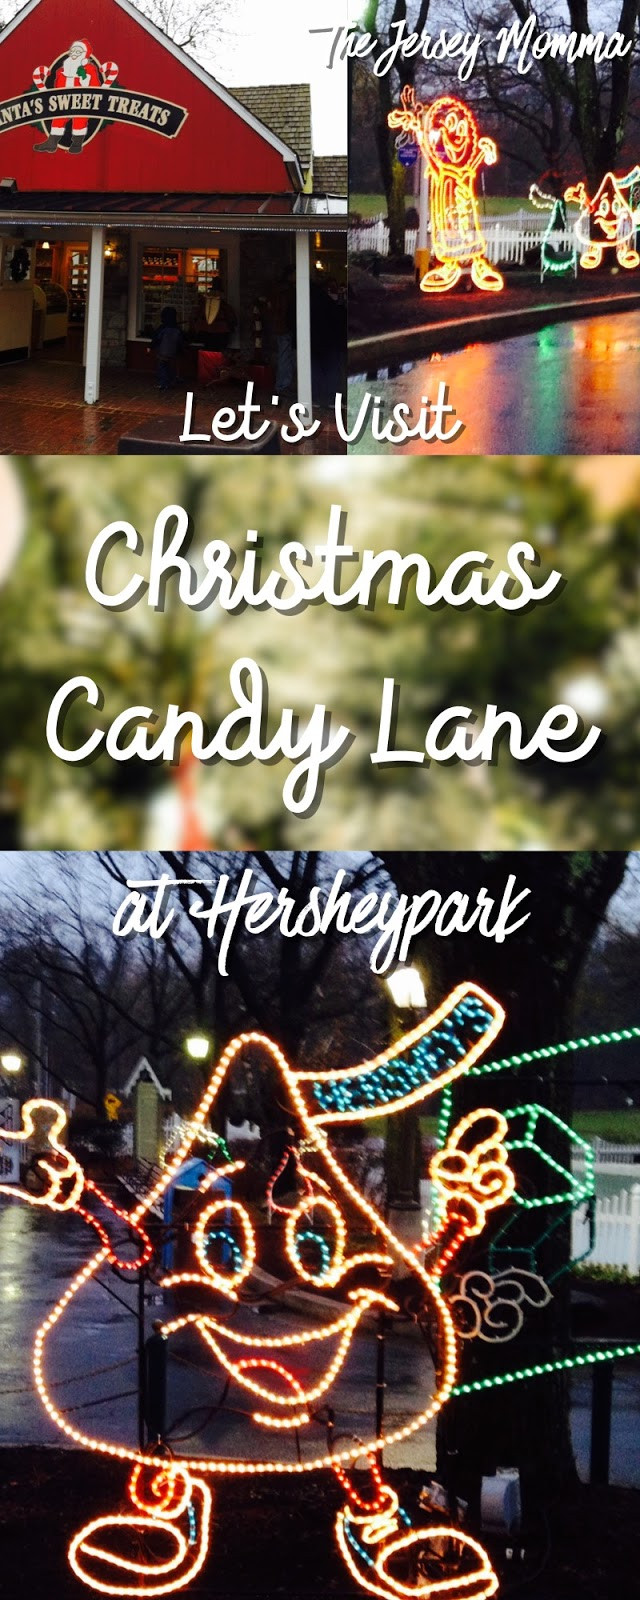 Christmas Candy Lane
 The Jersey Momma A Review of Christmas in Hershey